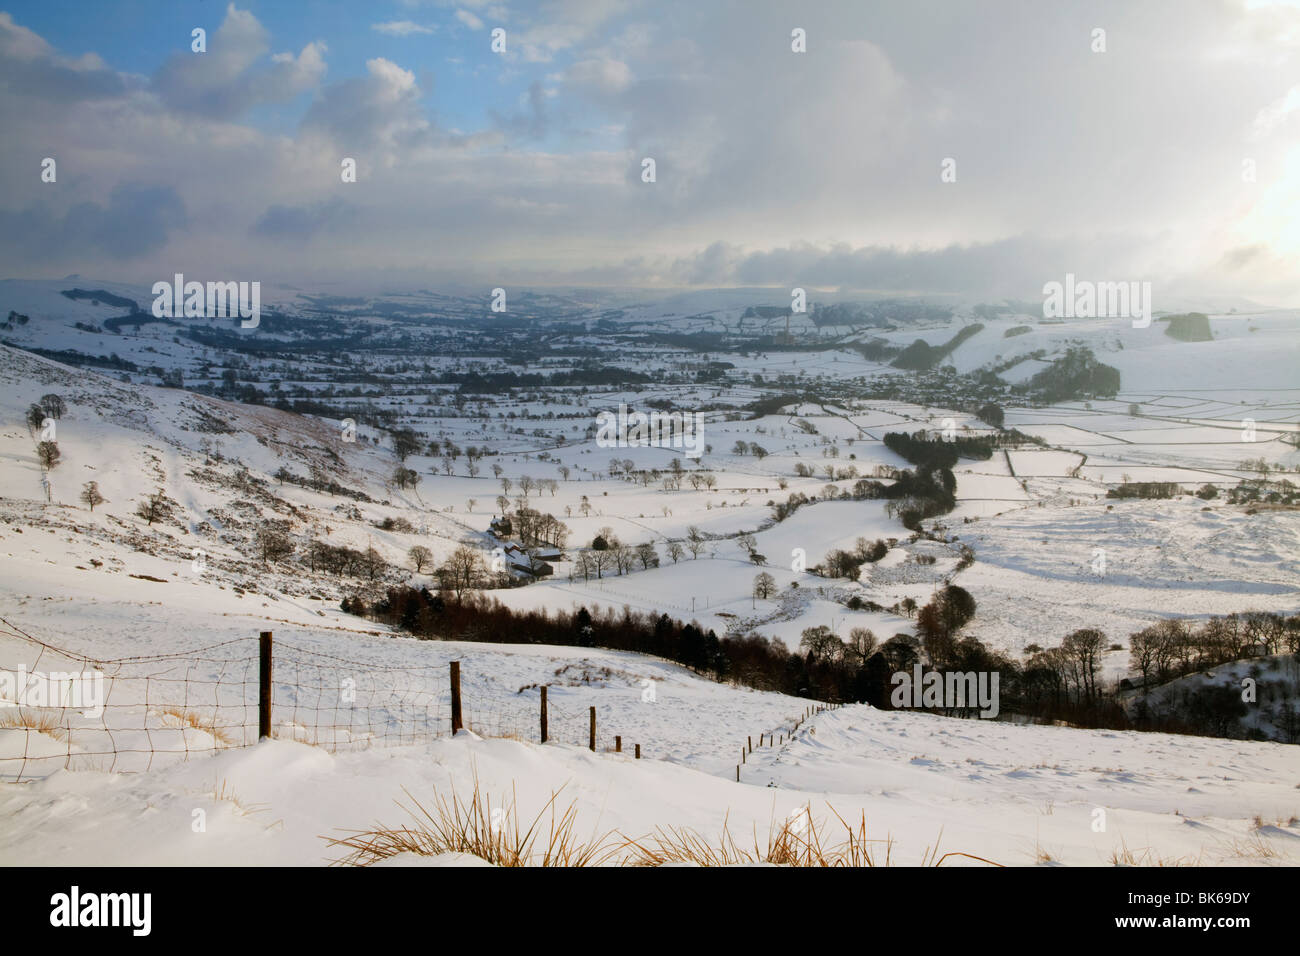 A snowy View over Hope Valley from Mam Tor in the Peak District National Park, UK, England Stock Photo